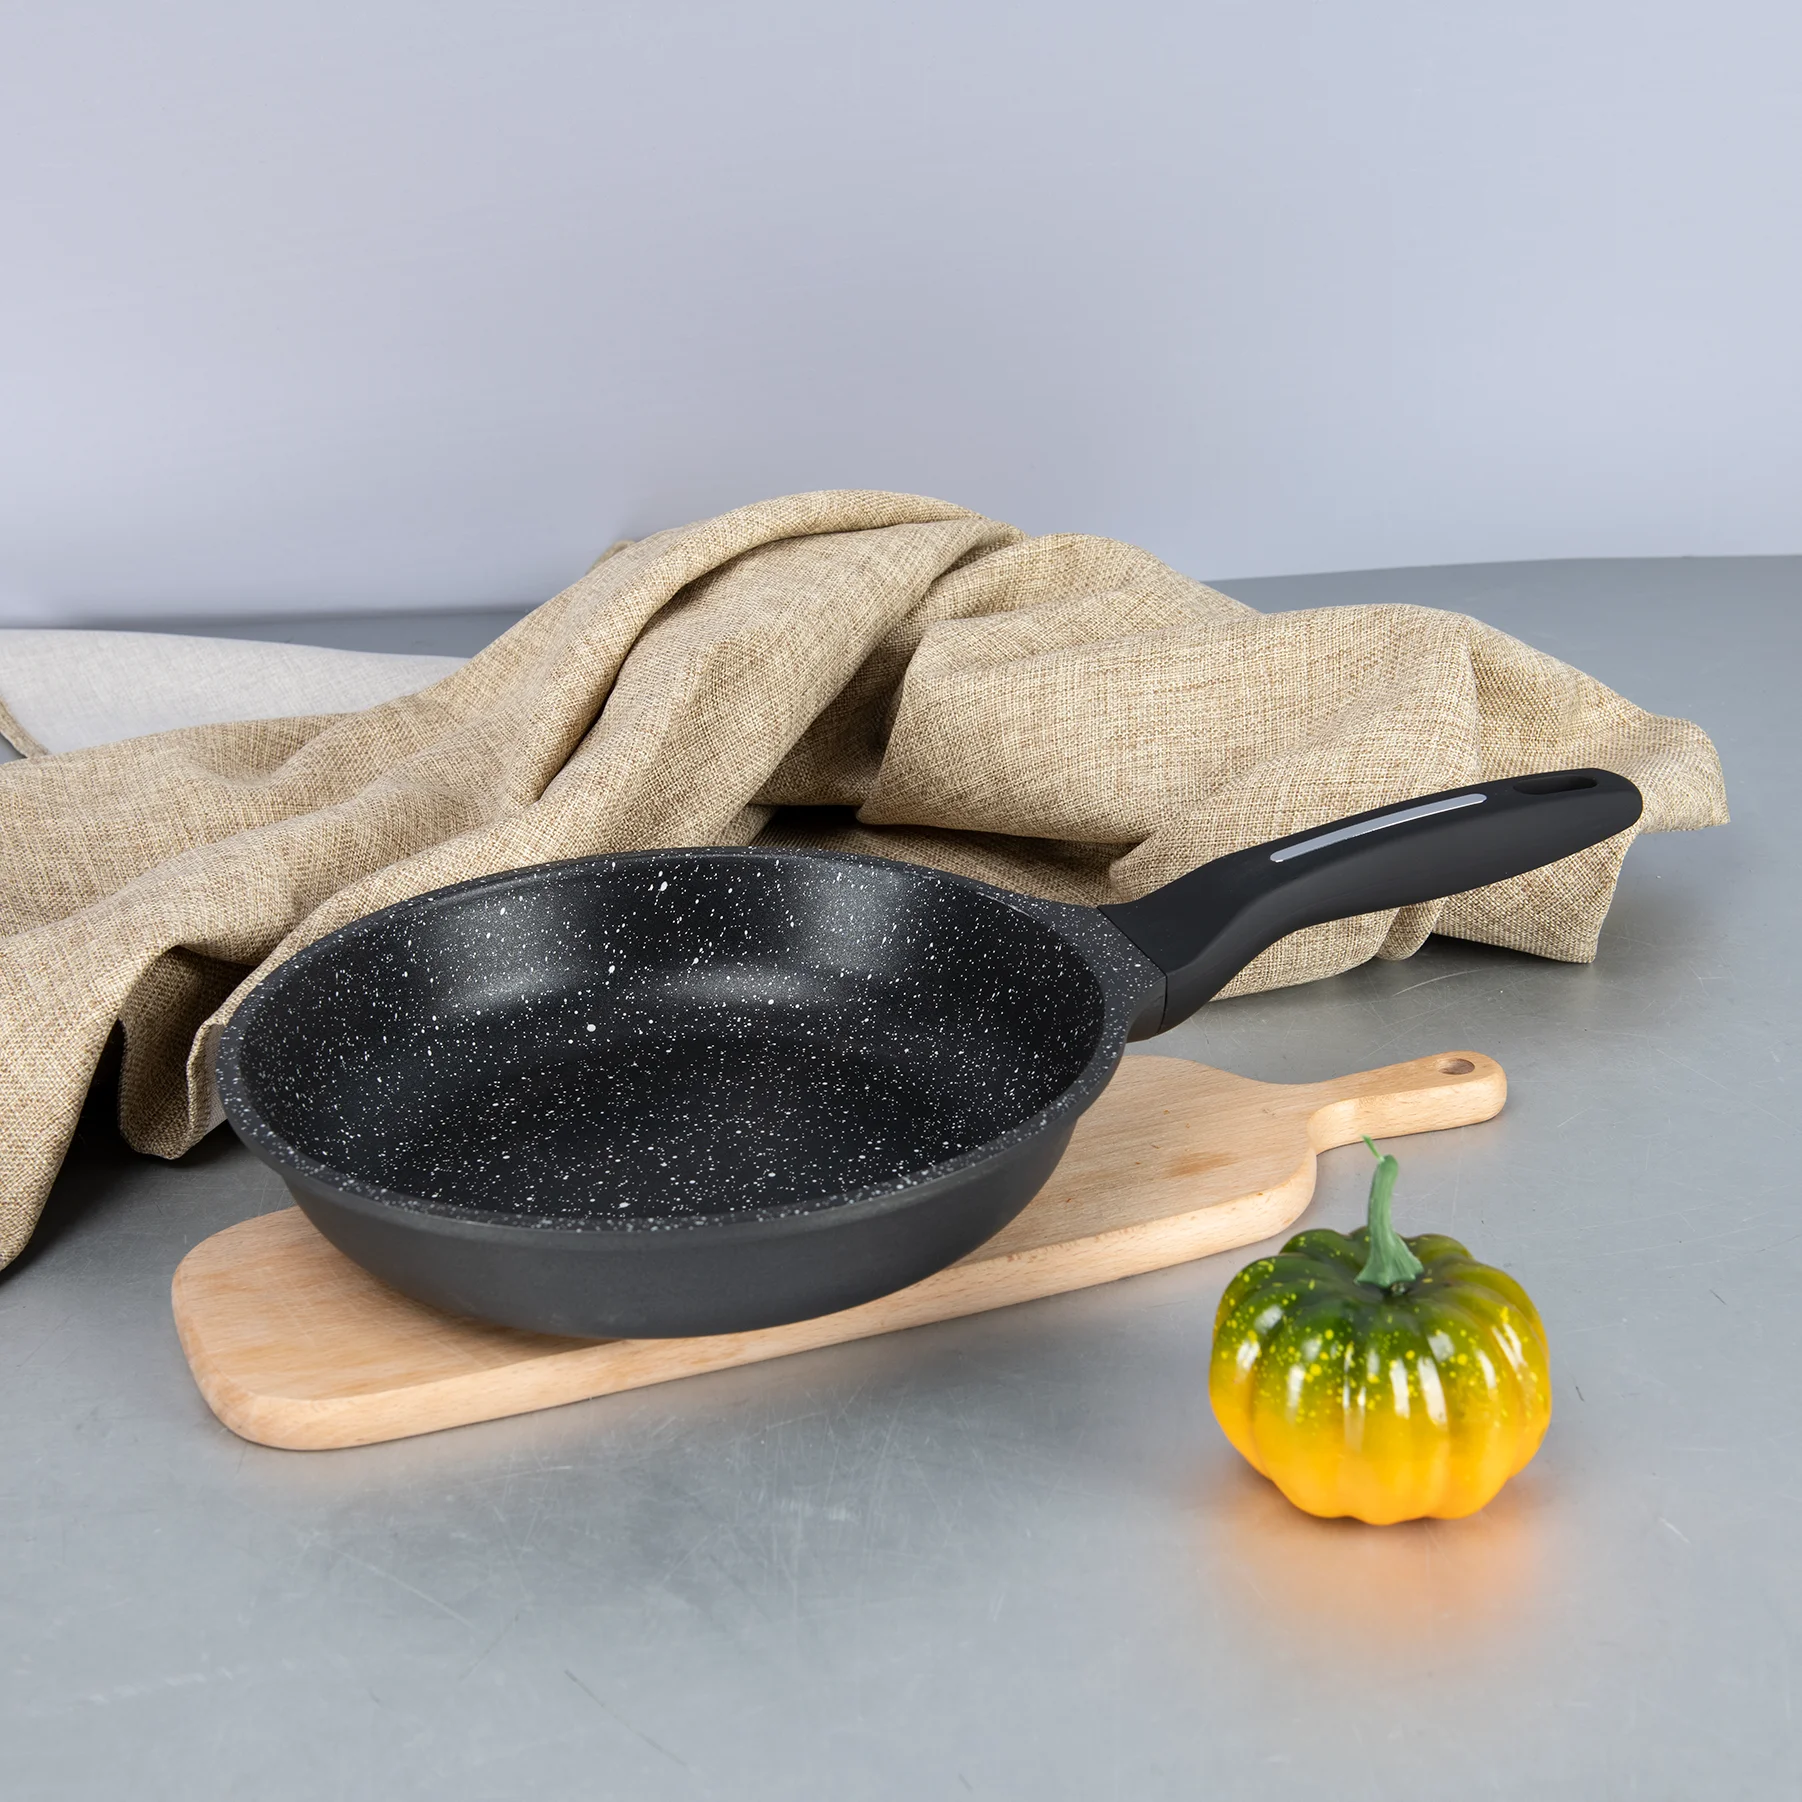 

BESCO Stock Escalation Series Non Stick Granite Coating Cast Aluminum Frying Pan Egg Frying Pan with Induction Bottom Black